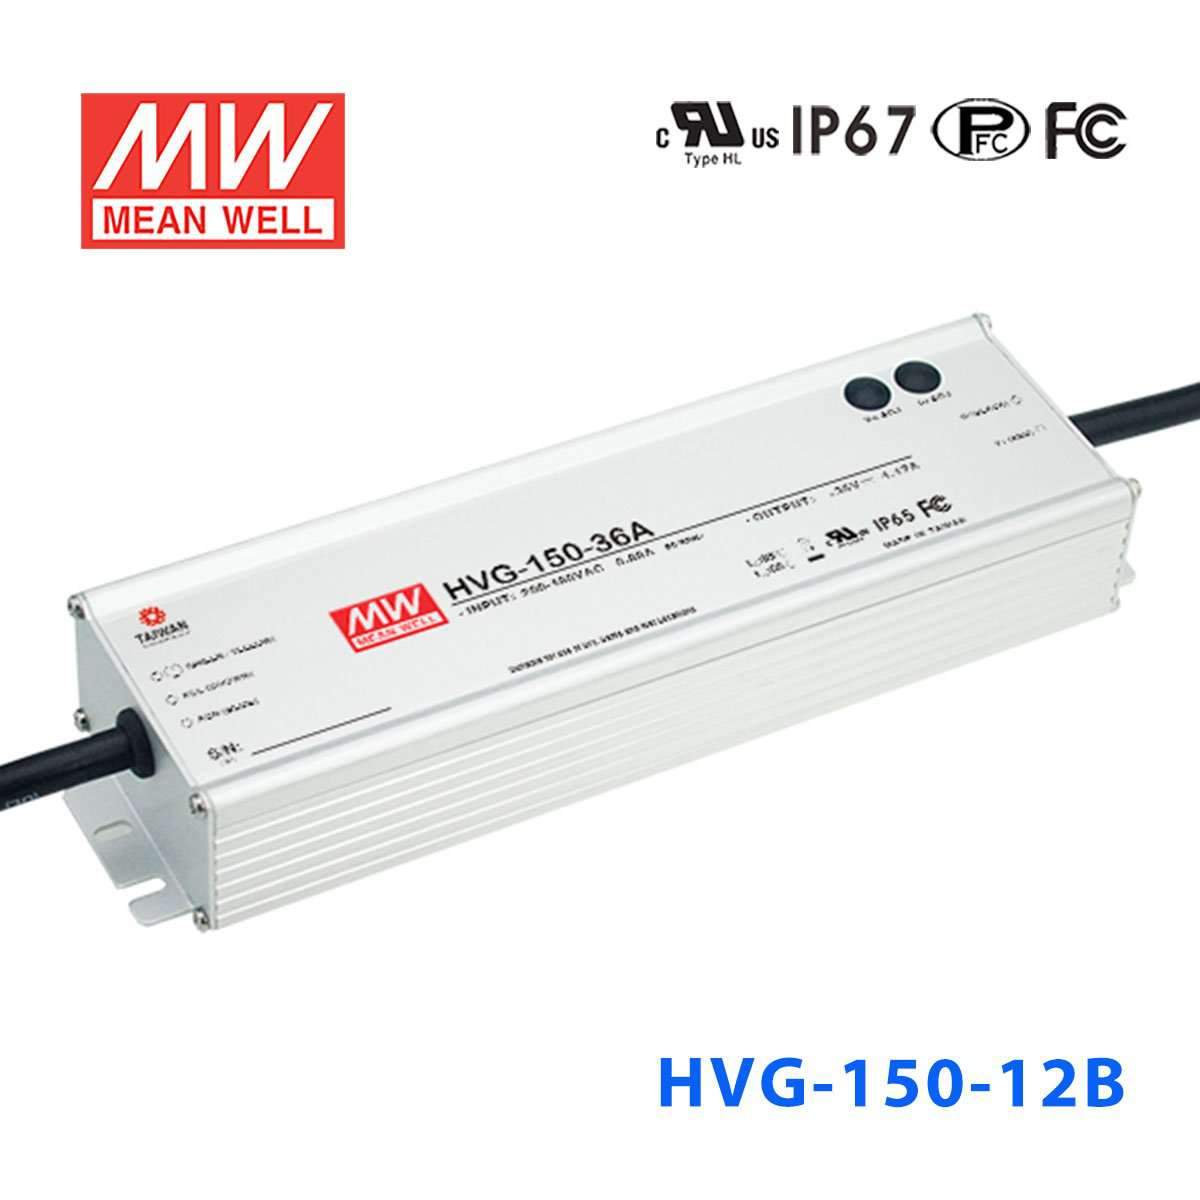 Mean Well HVG-150-12B Power Supply 120W 12V - Dimmable